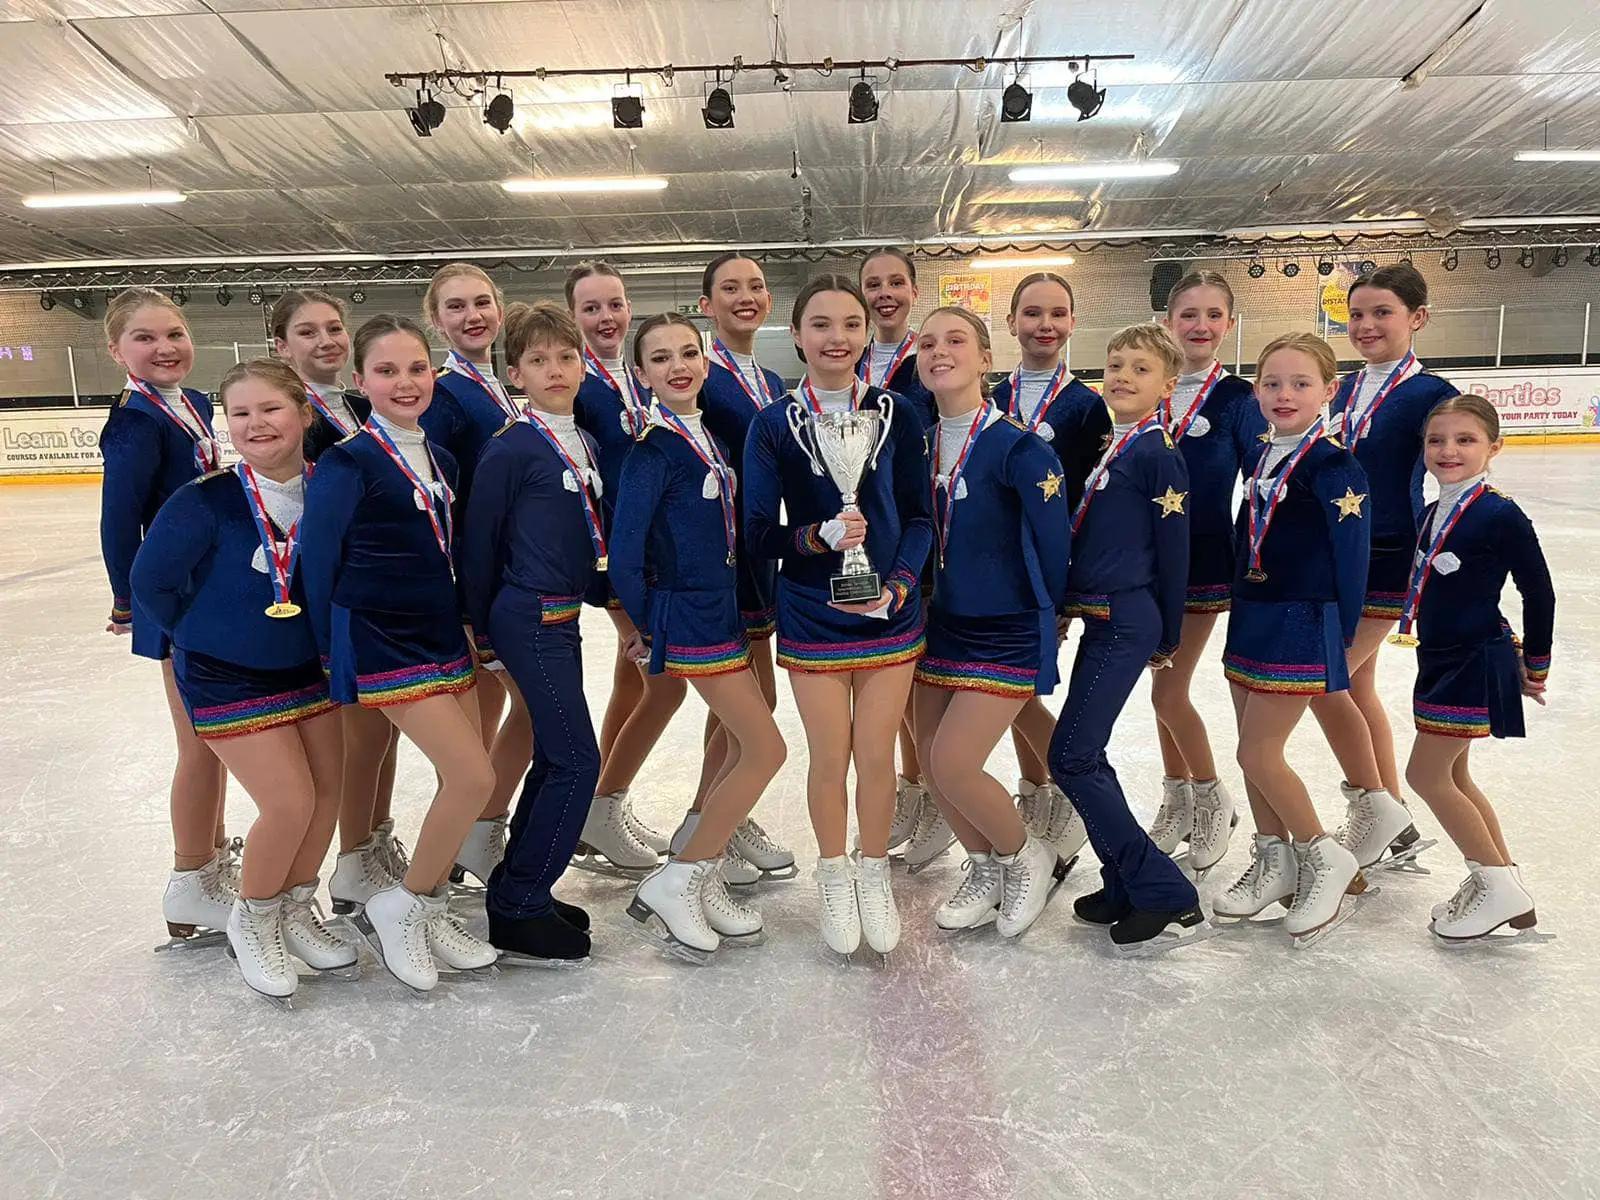 Wight Sequins British Champions in the Juvenile category